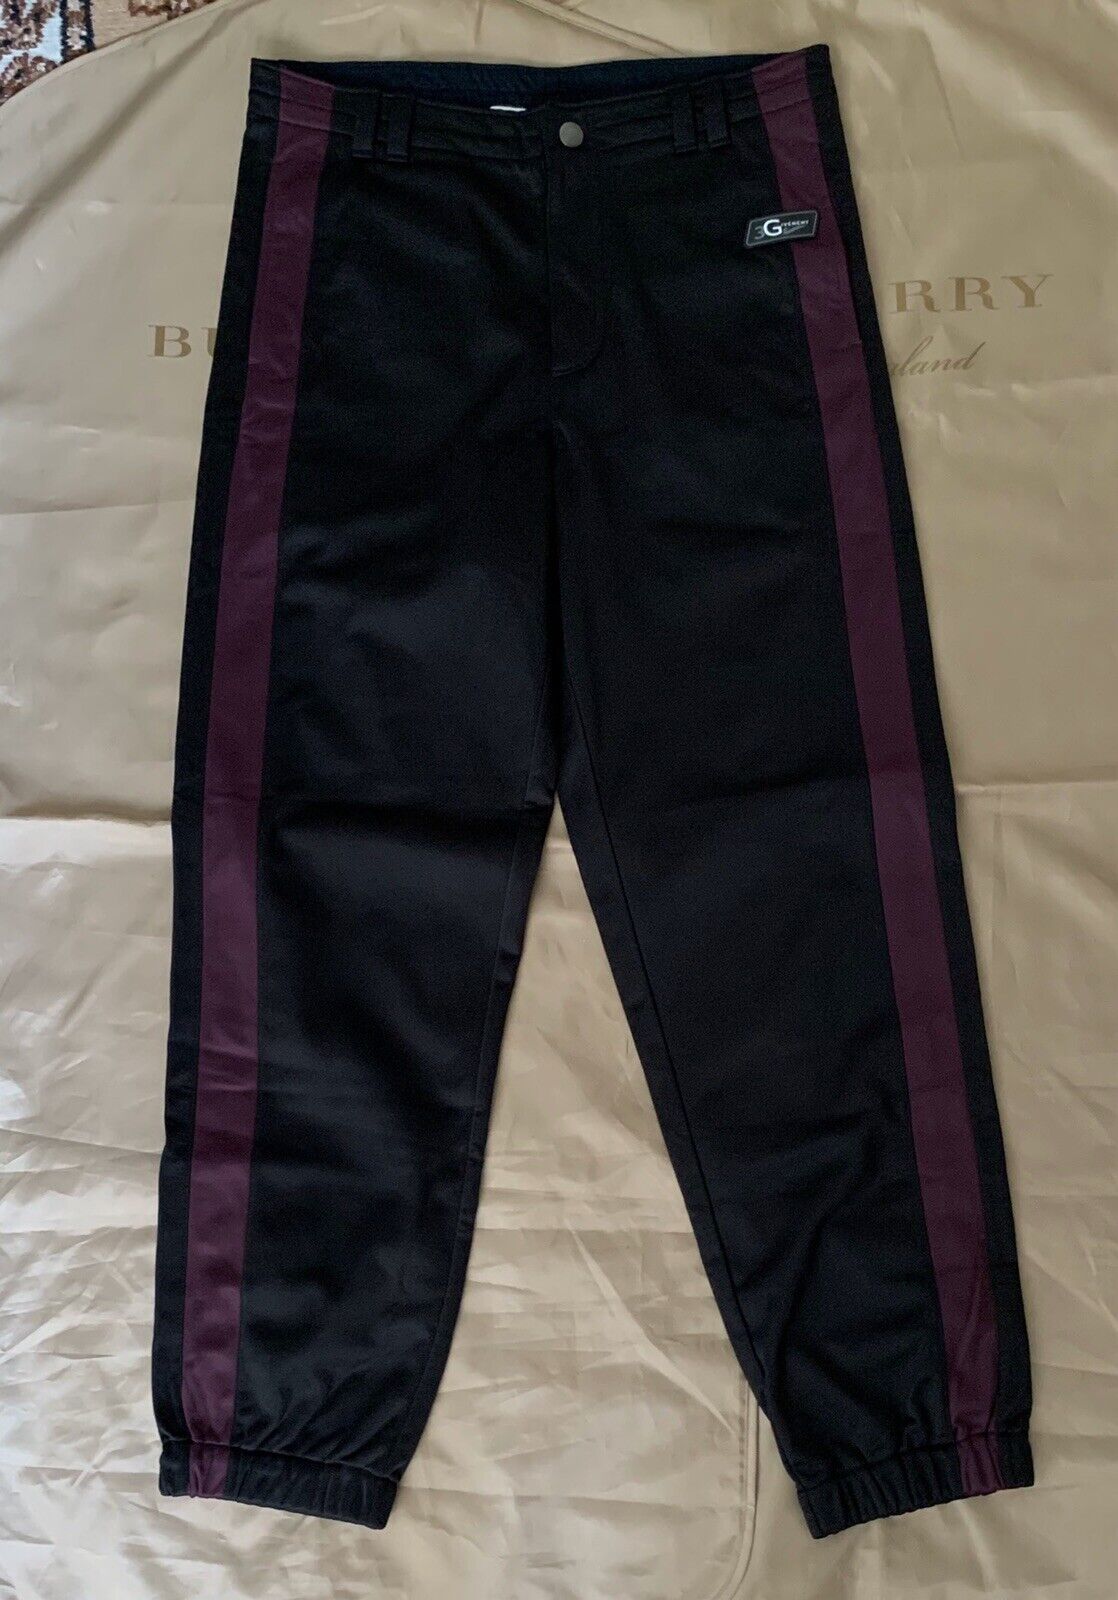 Givenchy Slim-fit Jogger Pants In Jersey - Bright Pink